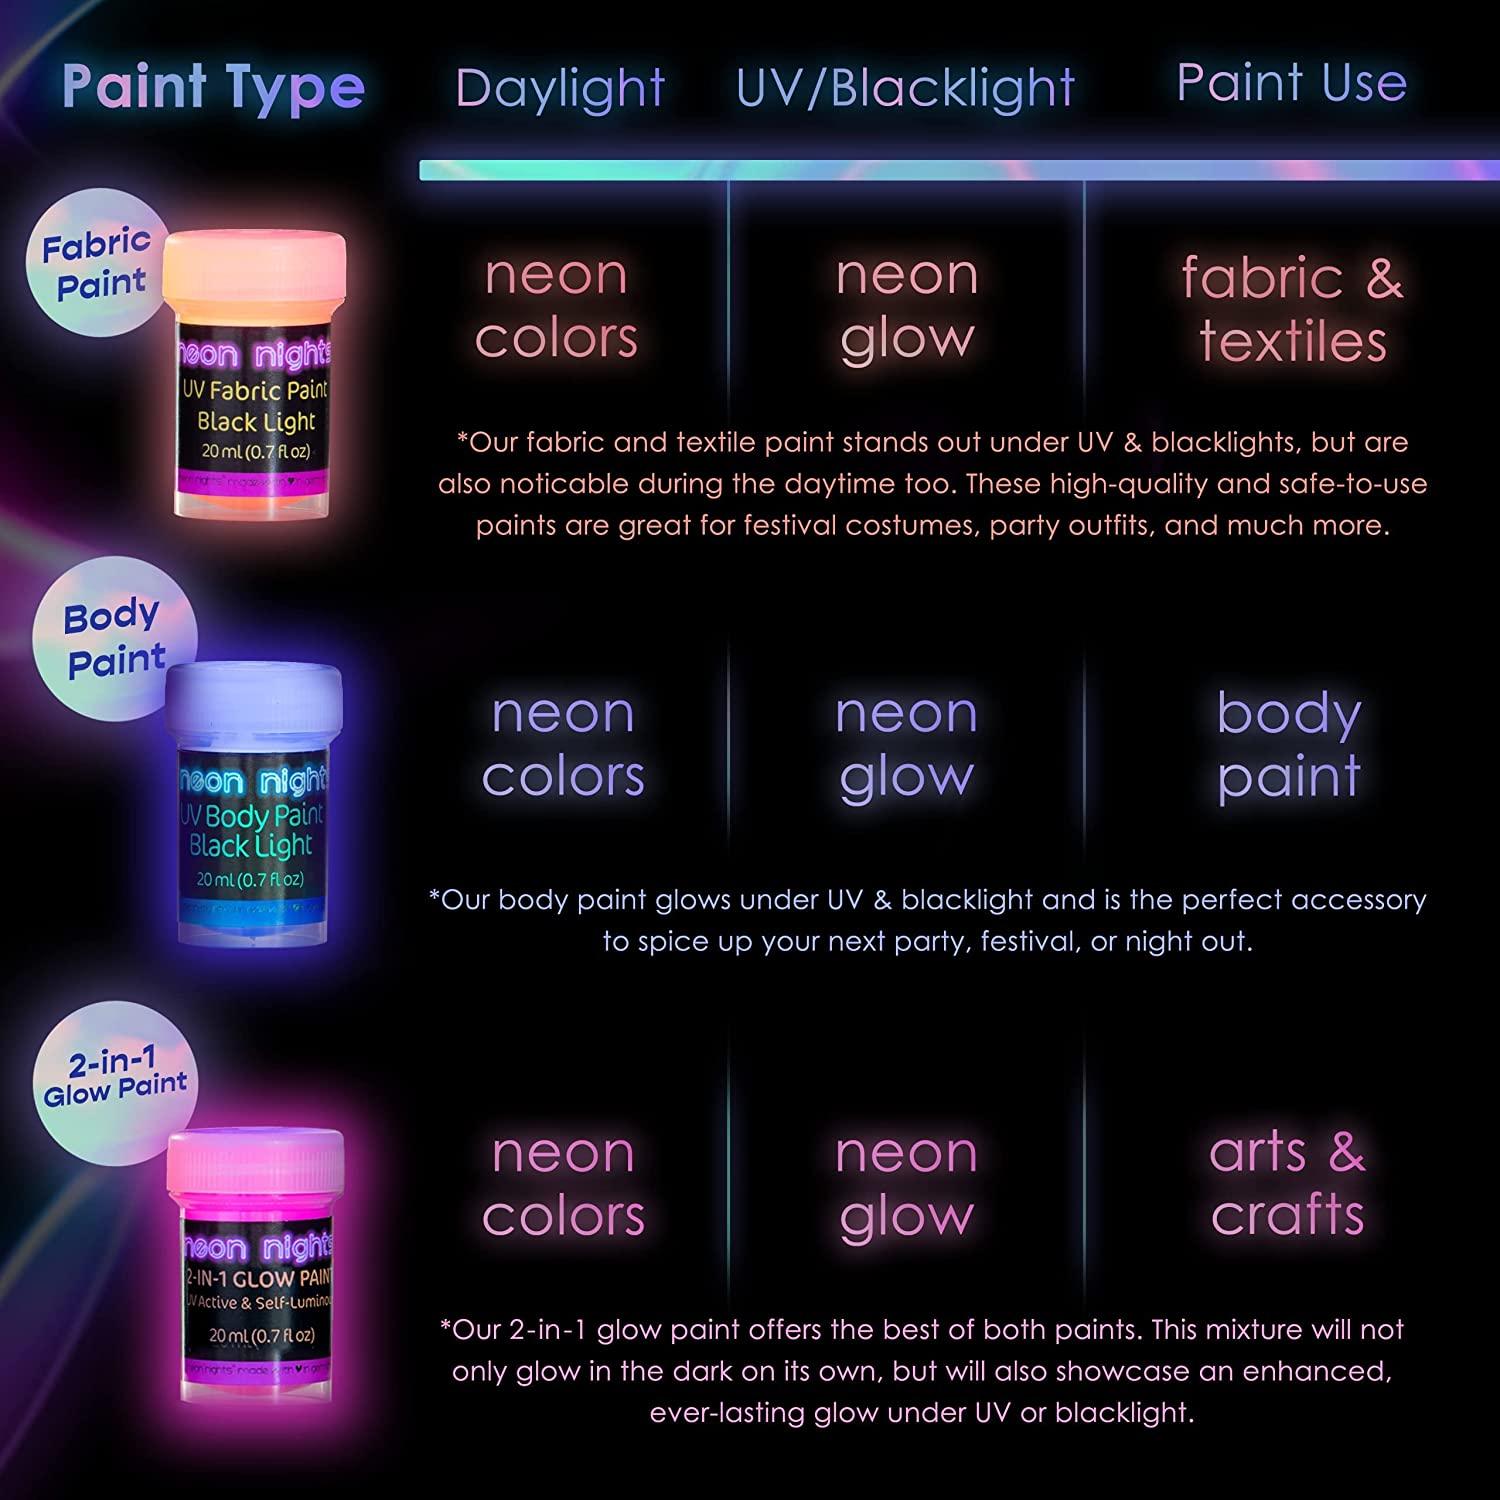 Glow in the dark face paint is perfect for parties!